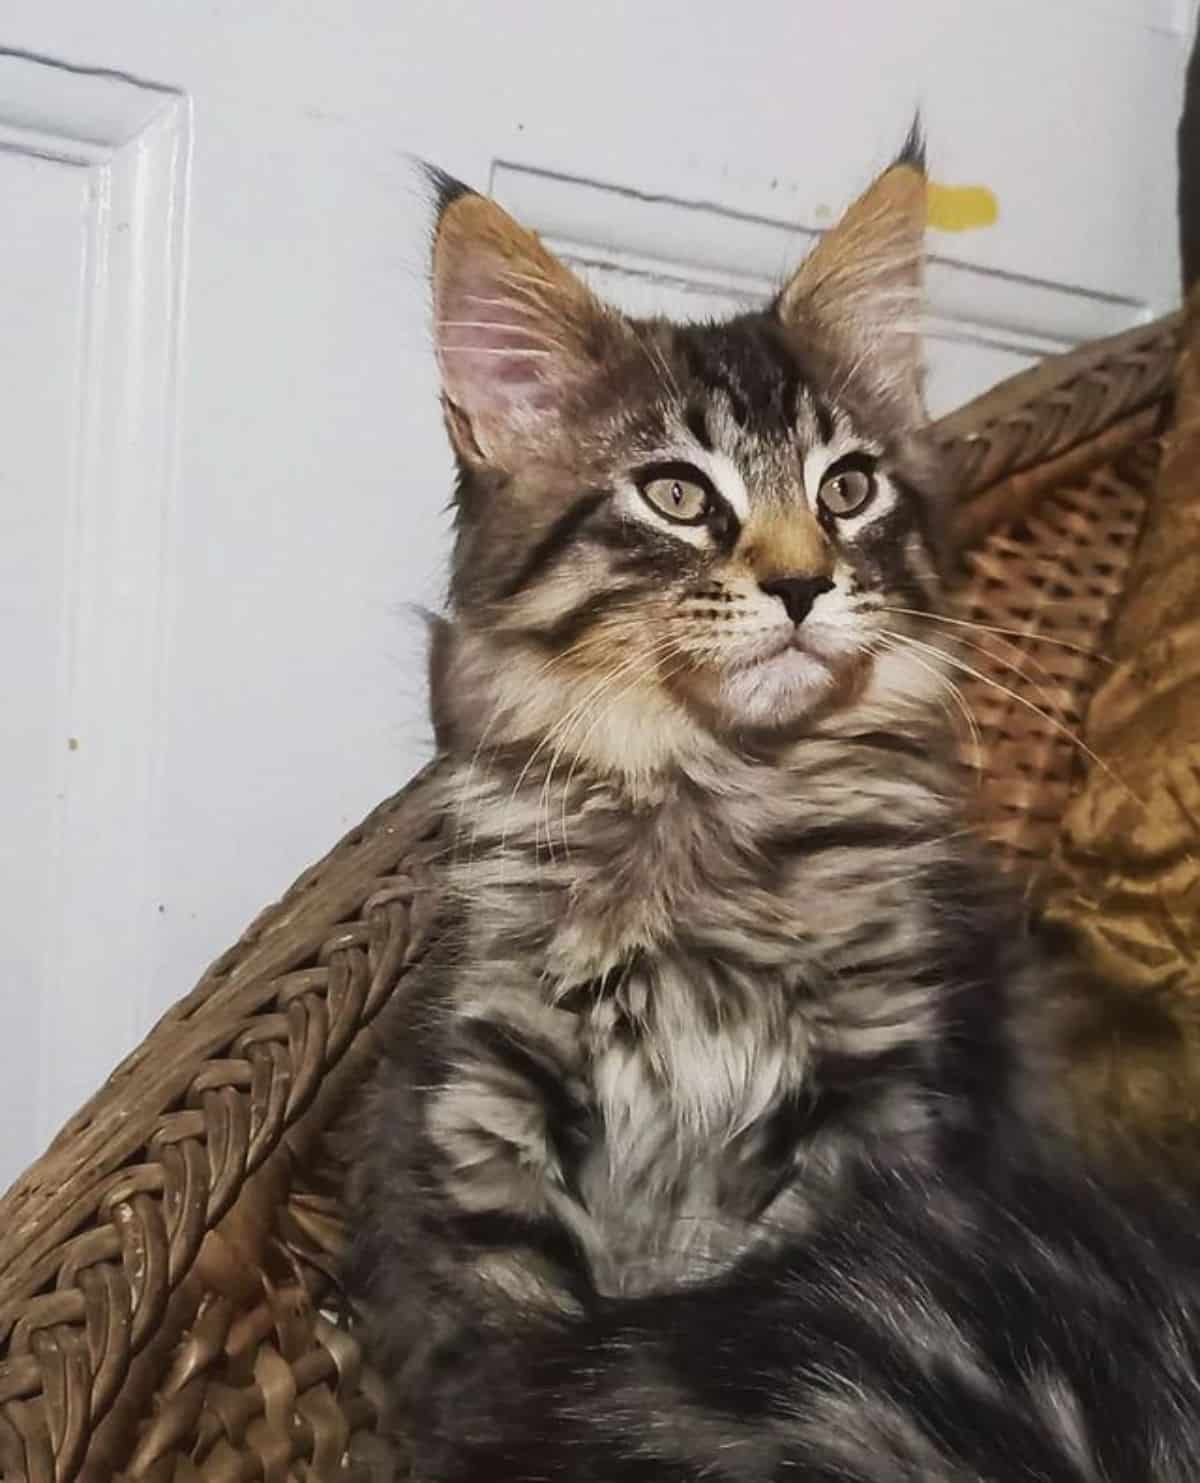 A fluffy tabby maine coon sitting on a chair.